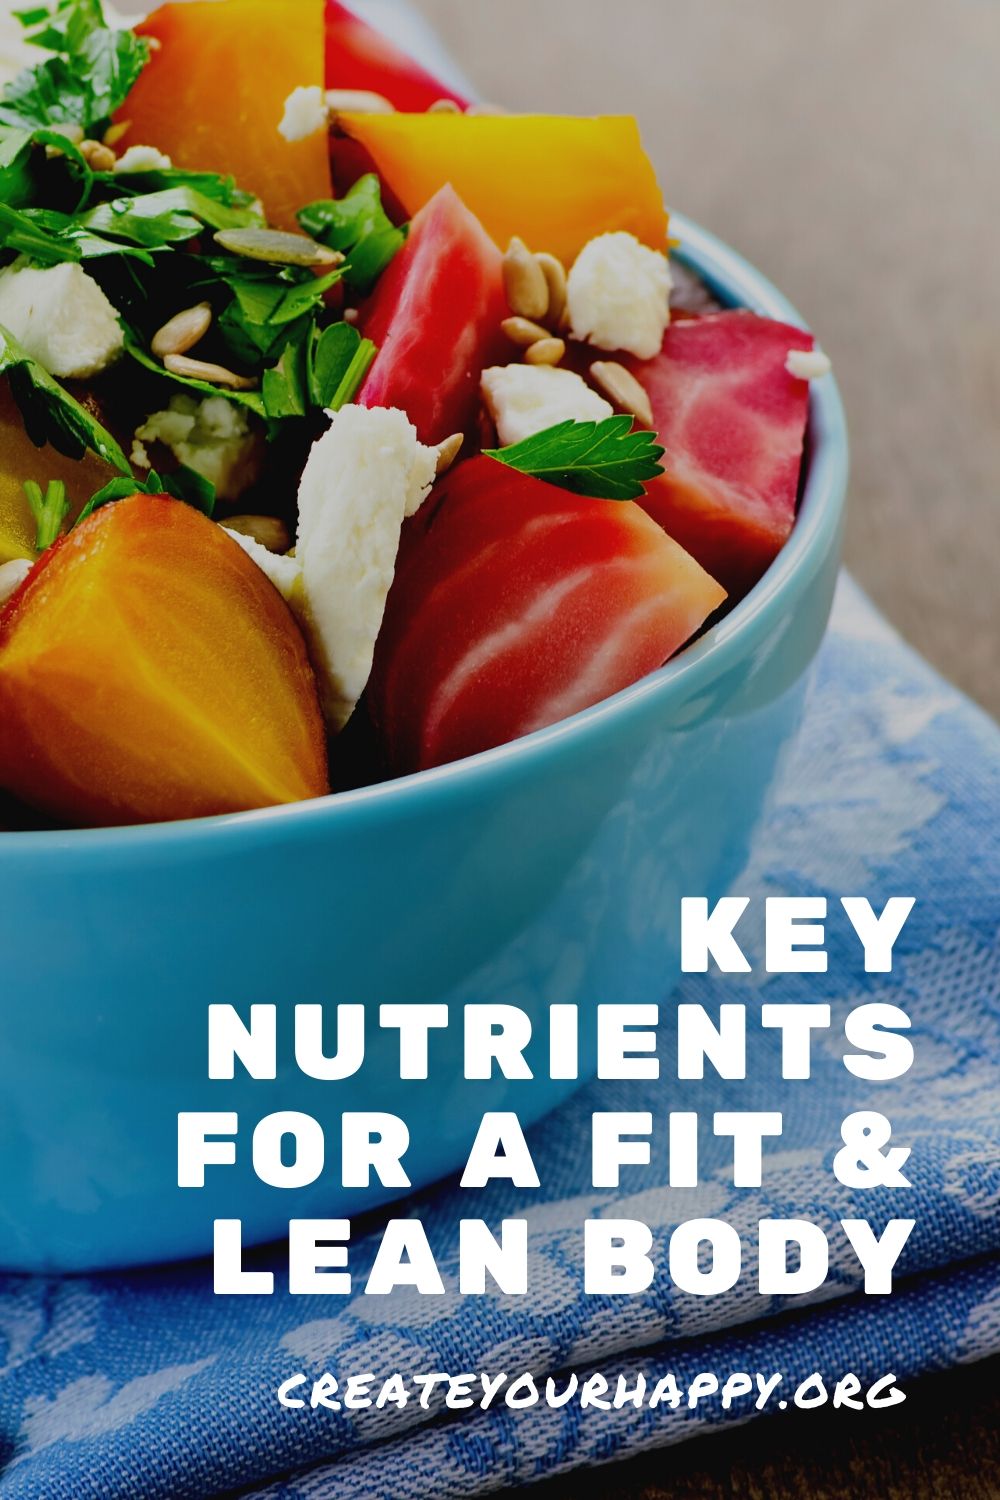 Key Nutrients For A Fit & Lean Body